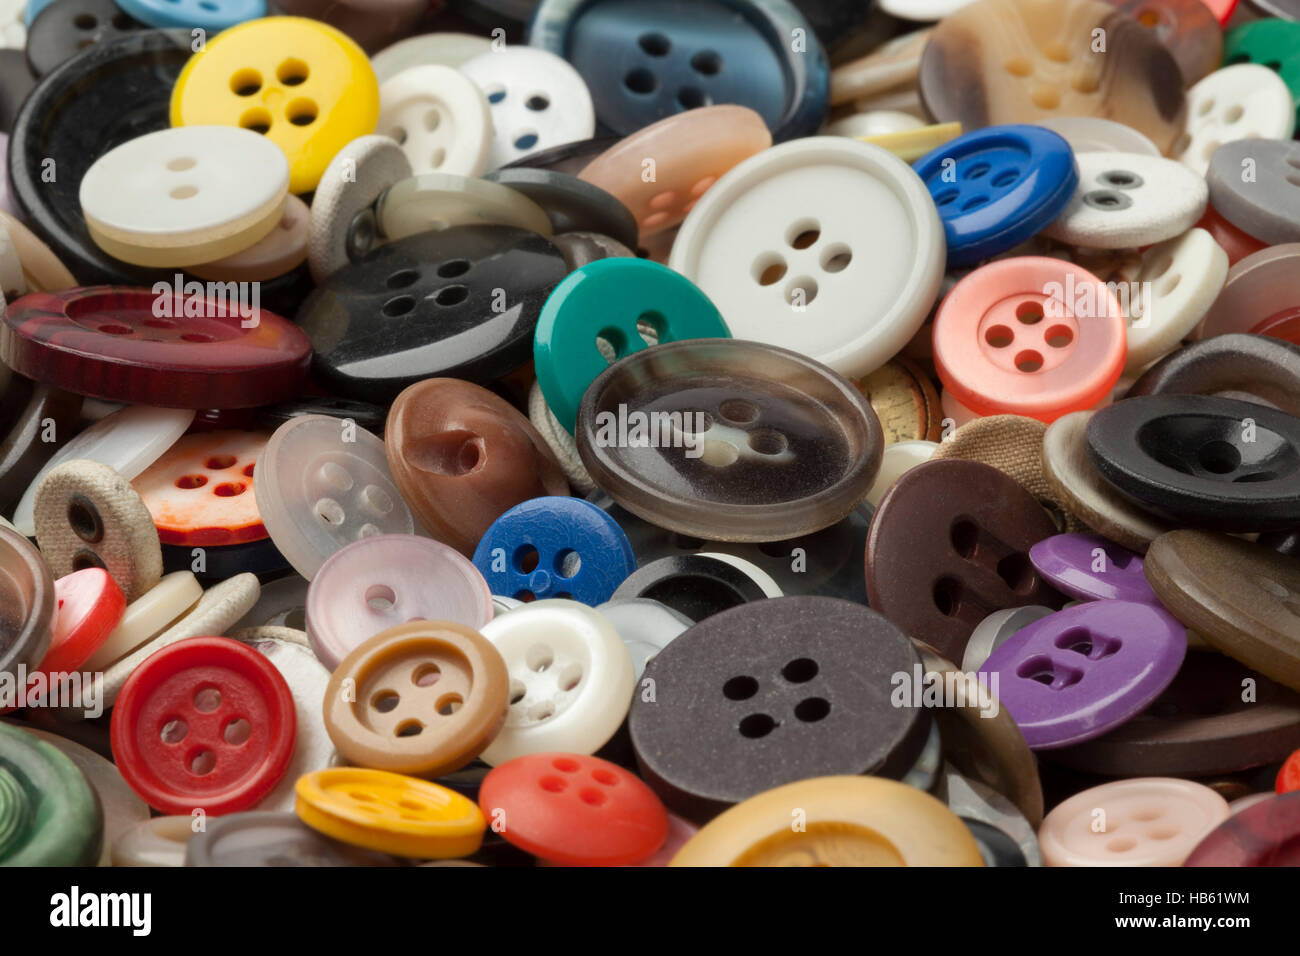 Collection of colorful sewing buttons full frame close up Stock Photo